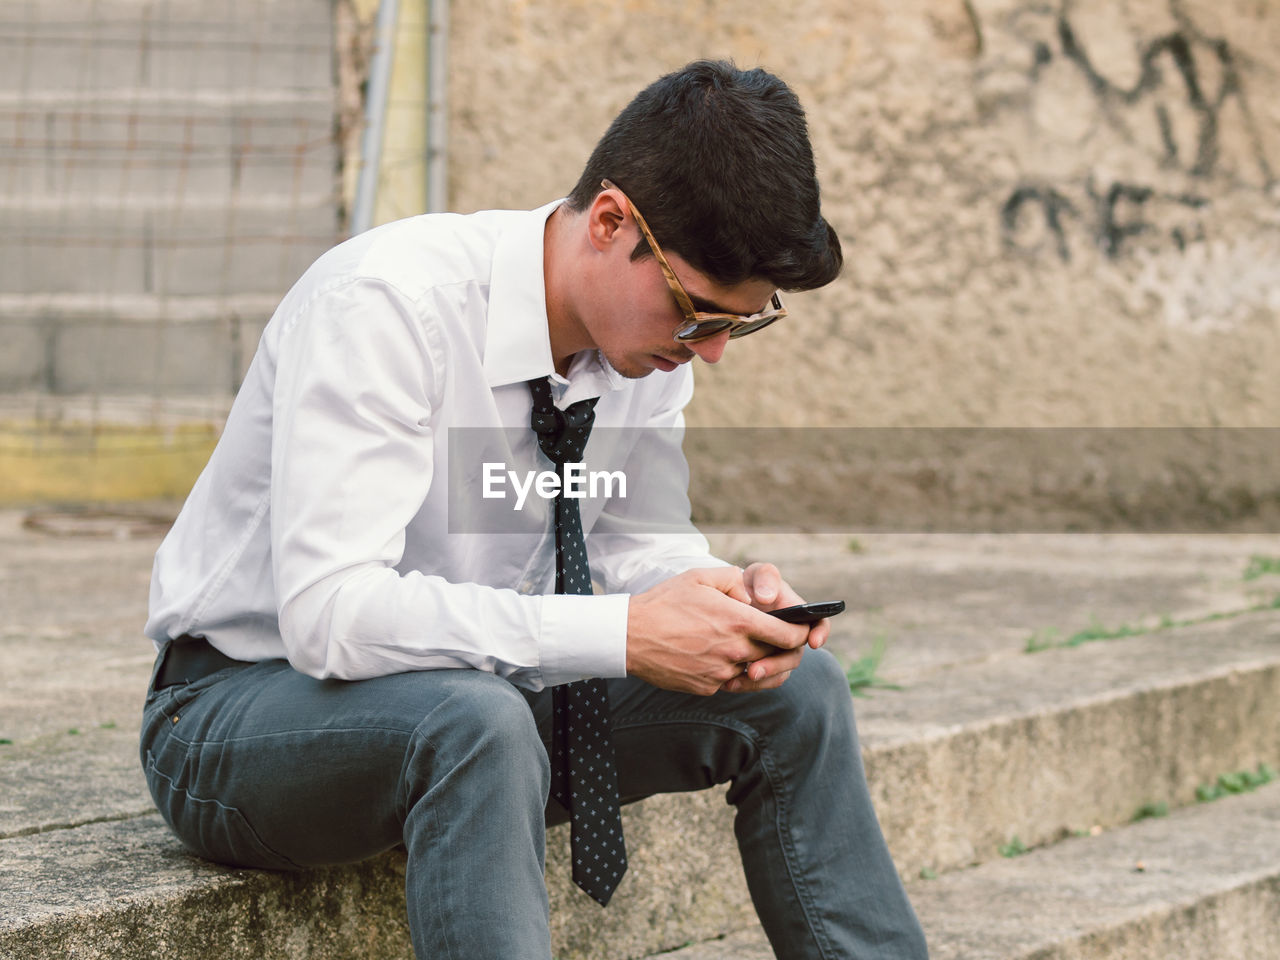 Man wearing tie using phone while sitting on steps